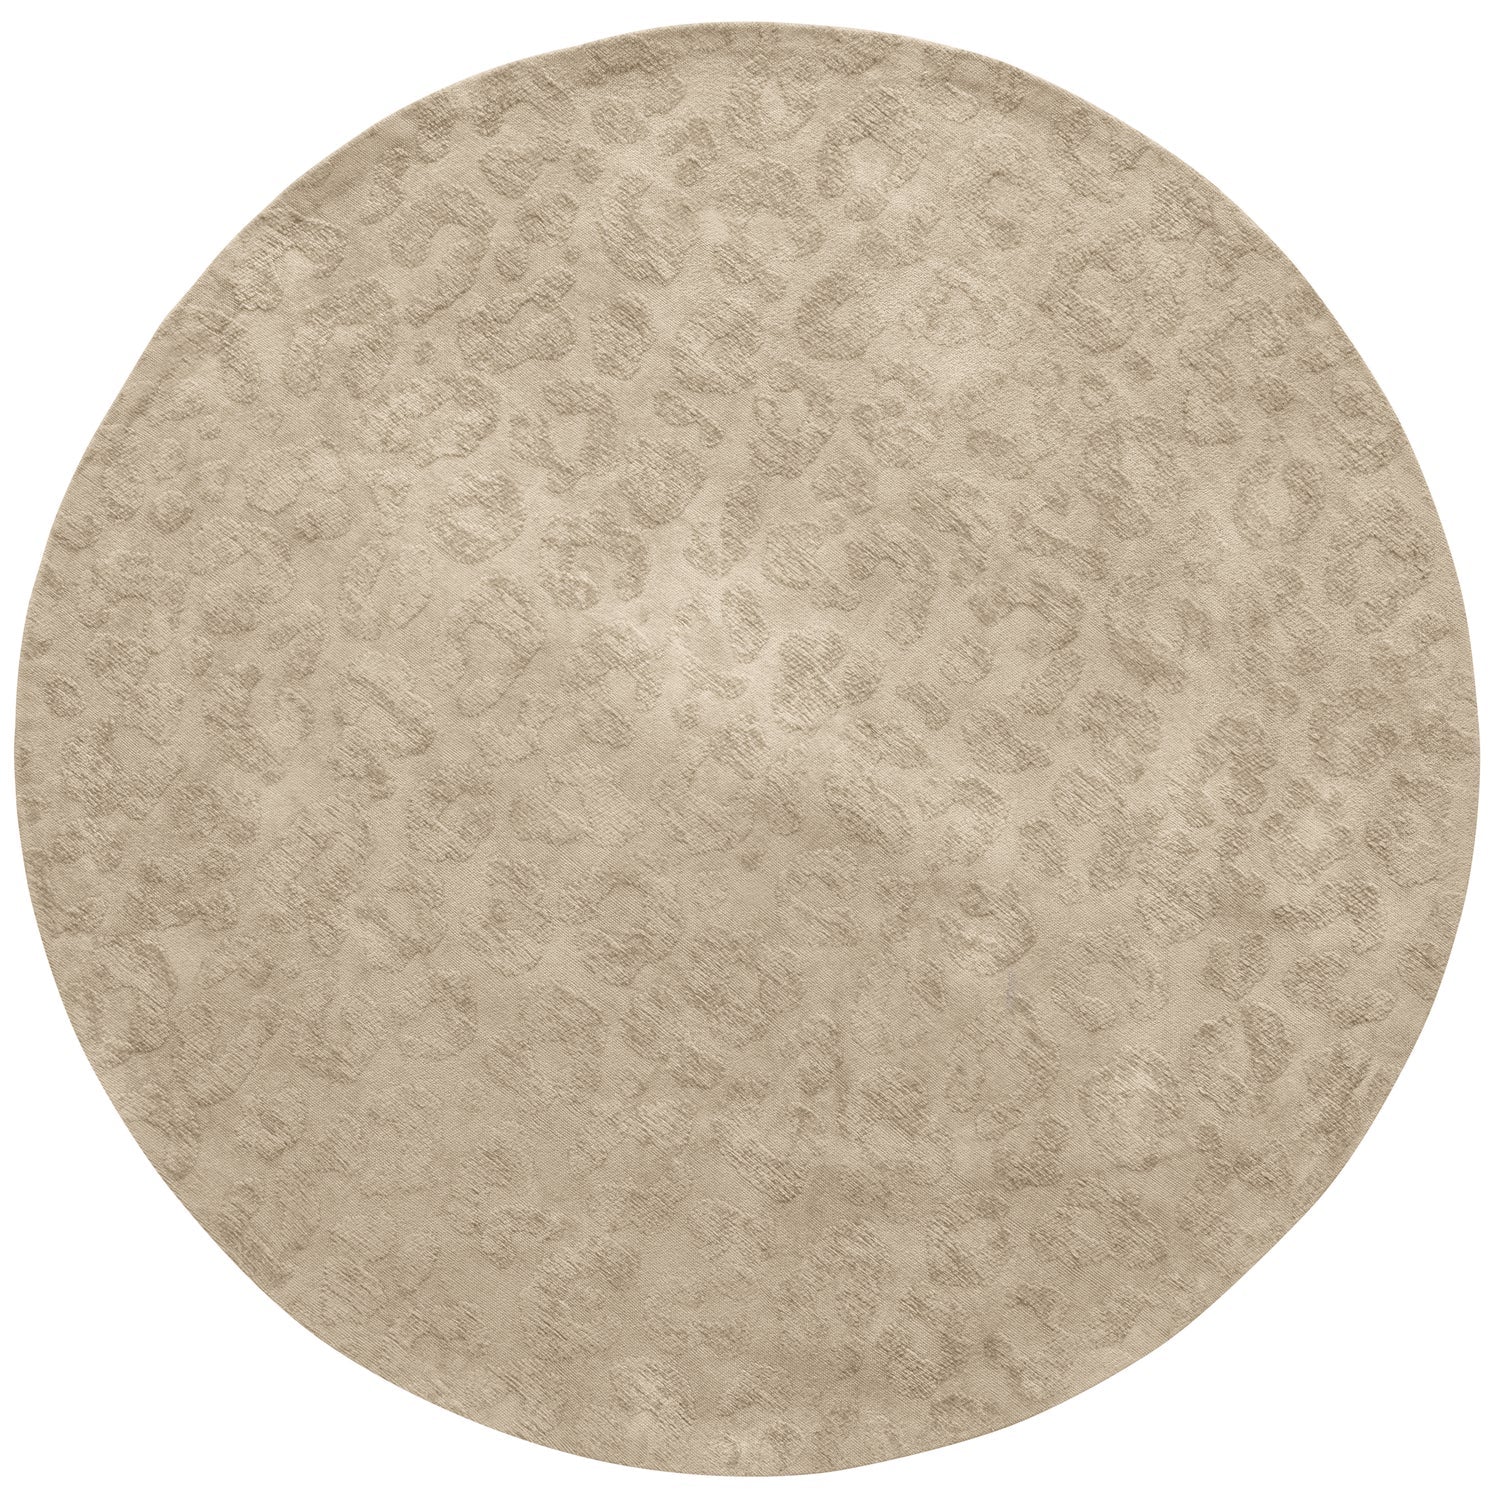 CATO RUG ROUND WITH PANTHER DESIGN SAND Ø150CM